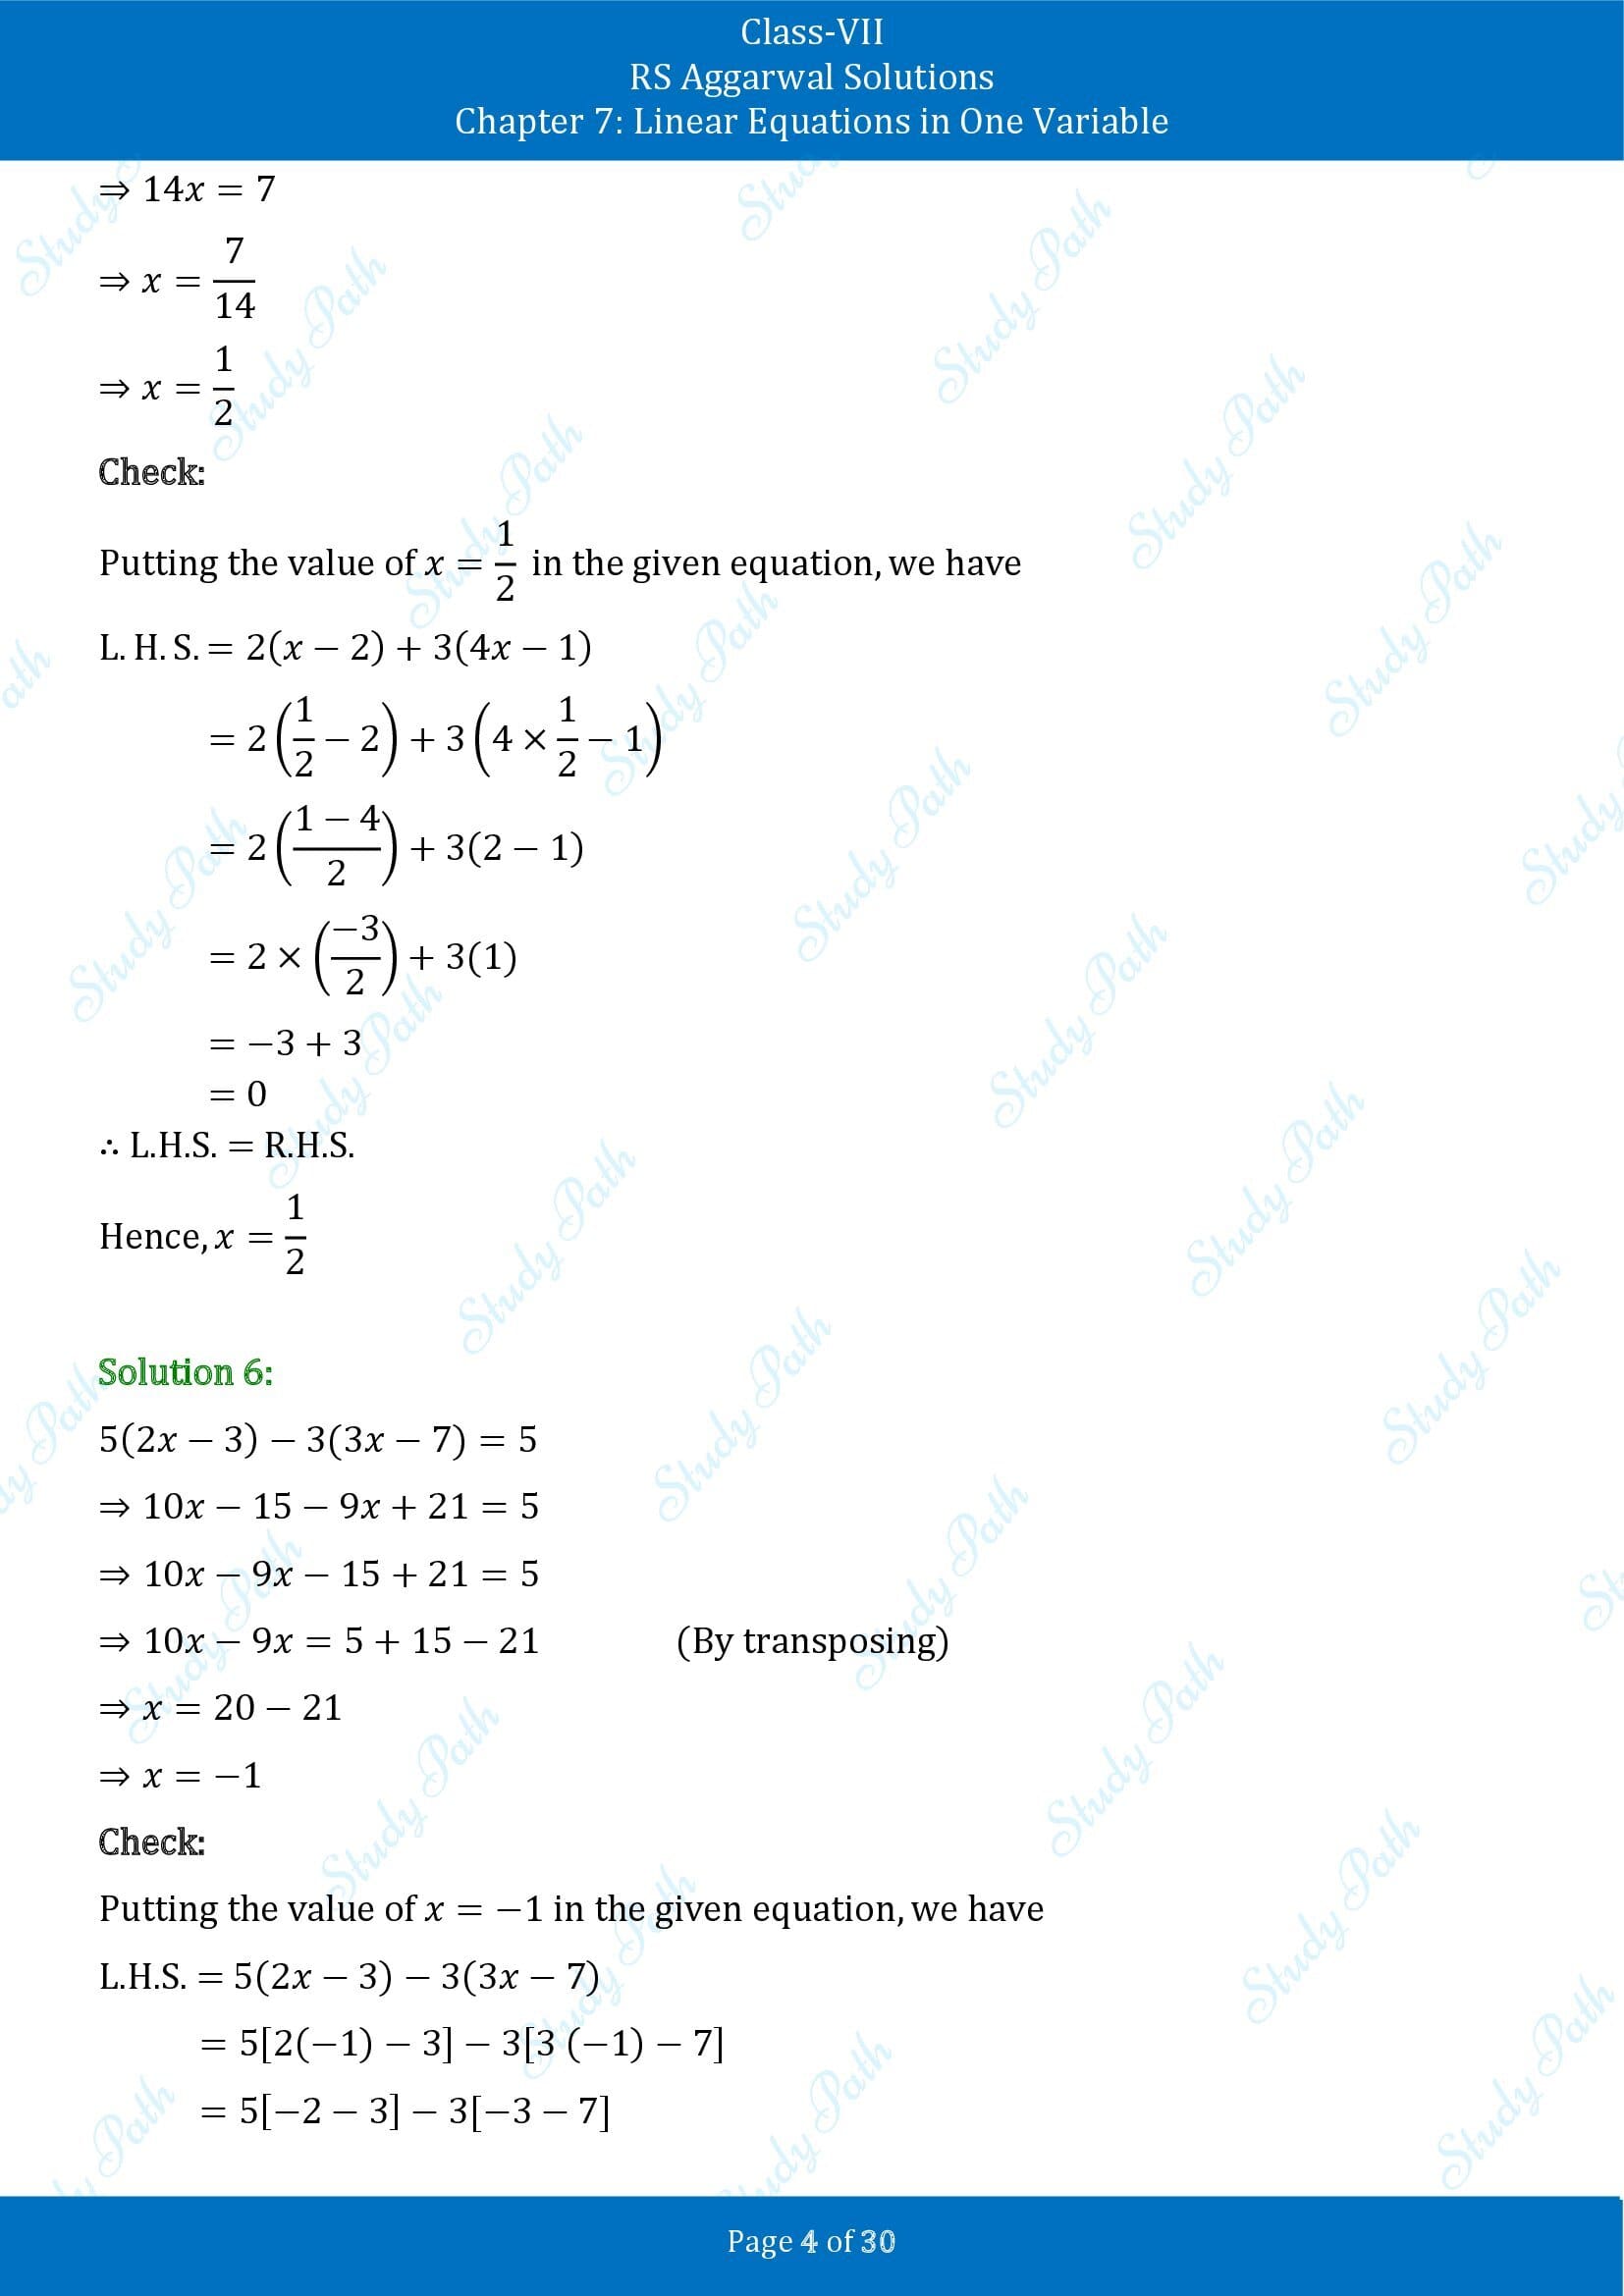 RS Aggarwal Solutions Class 7 Chapter 7 Linear Equations in One Variable Exercise 7A 00004